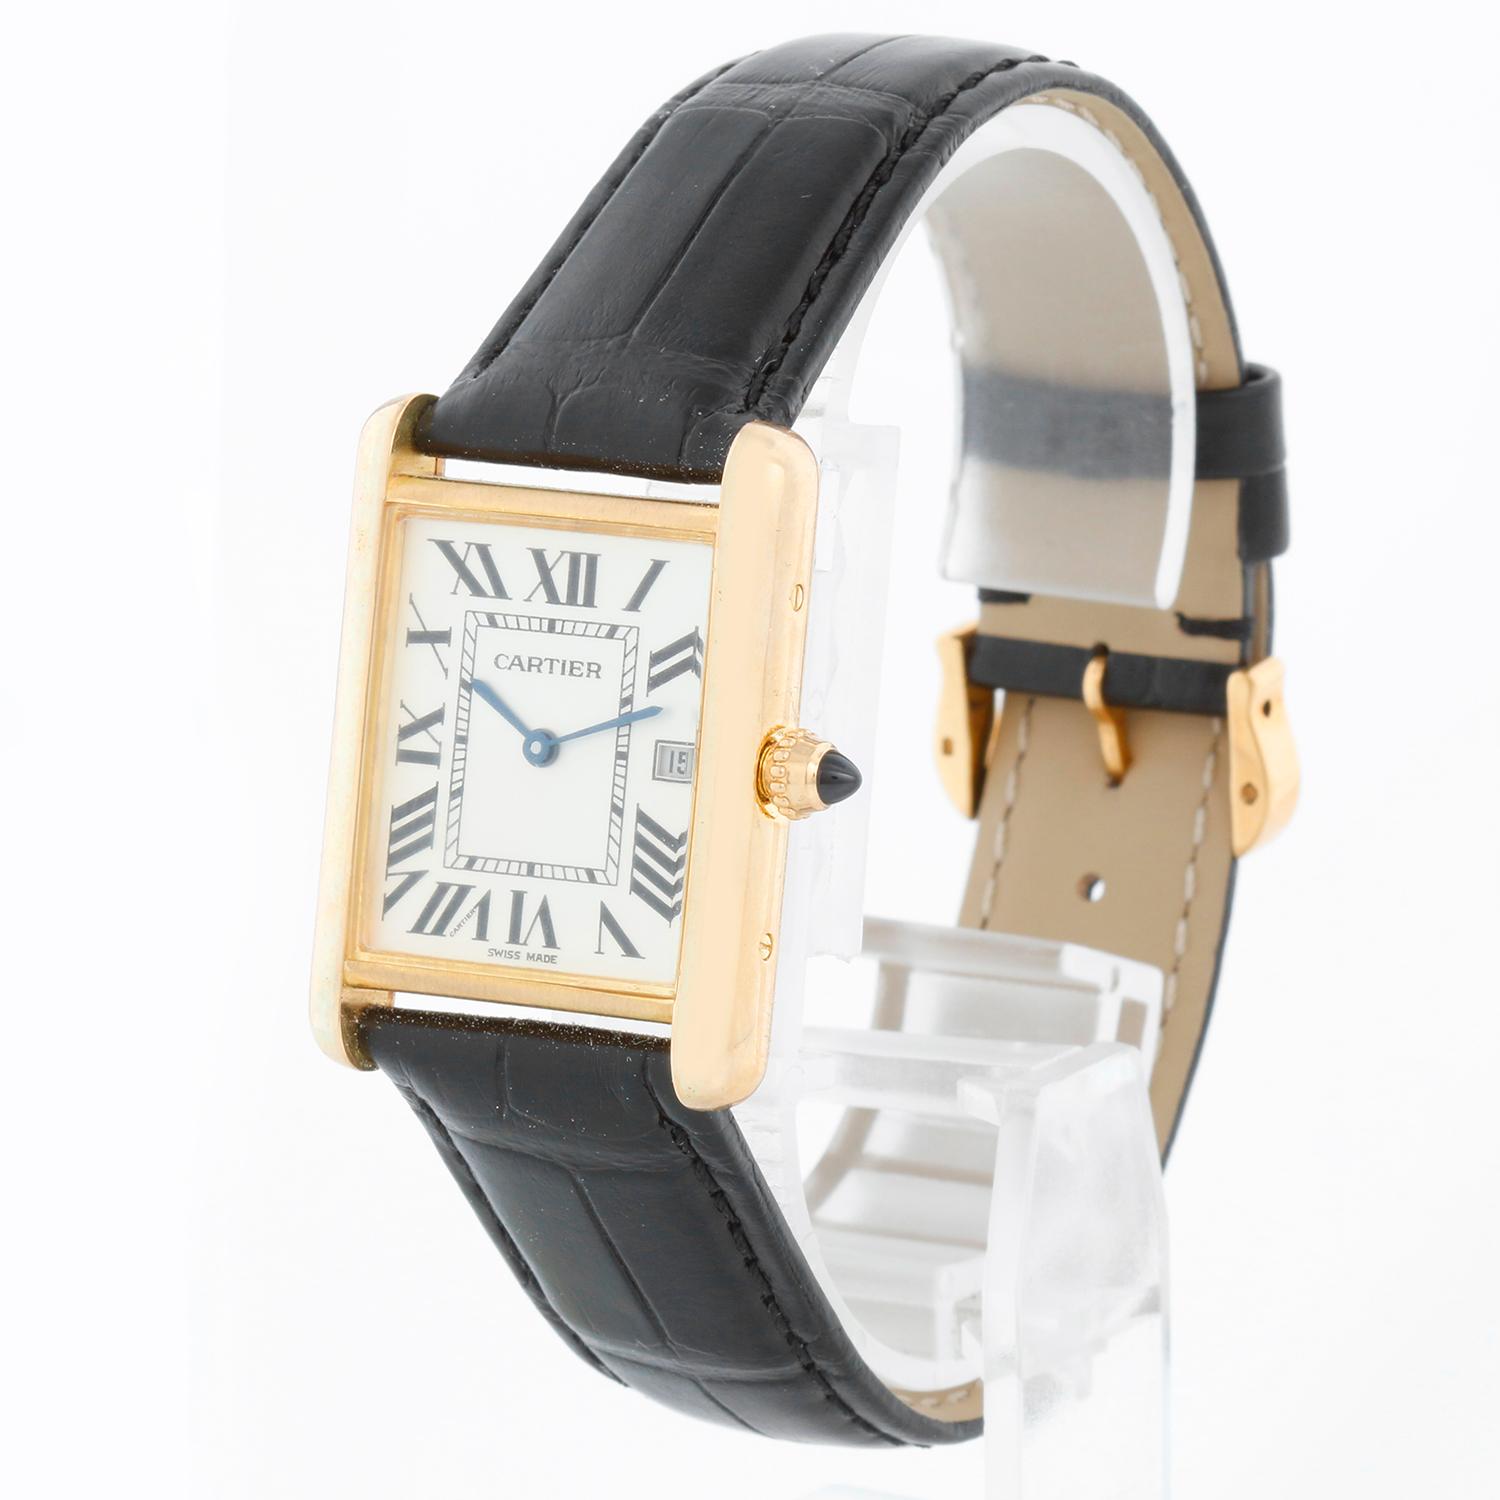 Cartier Tank Louis 18K Yellow Unisex Gold Watch W1529756 2441 - Quartz. 18K Yellow Gold ( 26 x 34 mm ). Flat Ivory dial with Roman numerals; date at 3 o'clock. Cartier alligator strap with Cartier tang gold buckle. Pre-owned with Custom box.